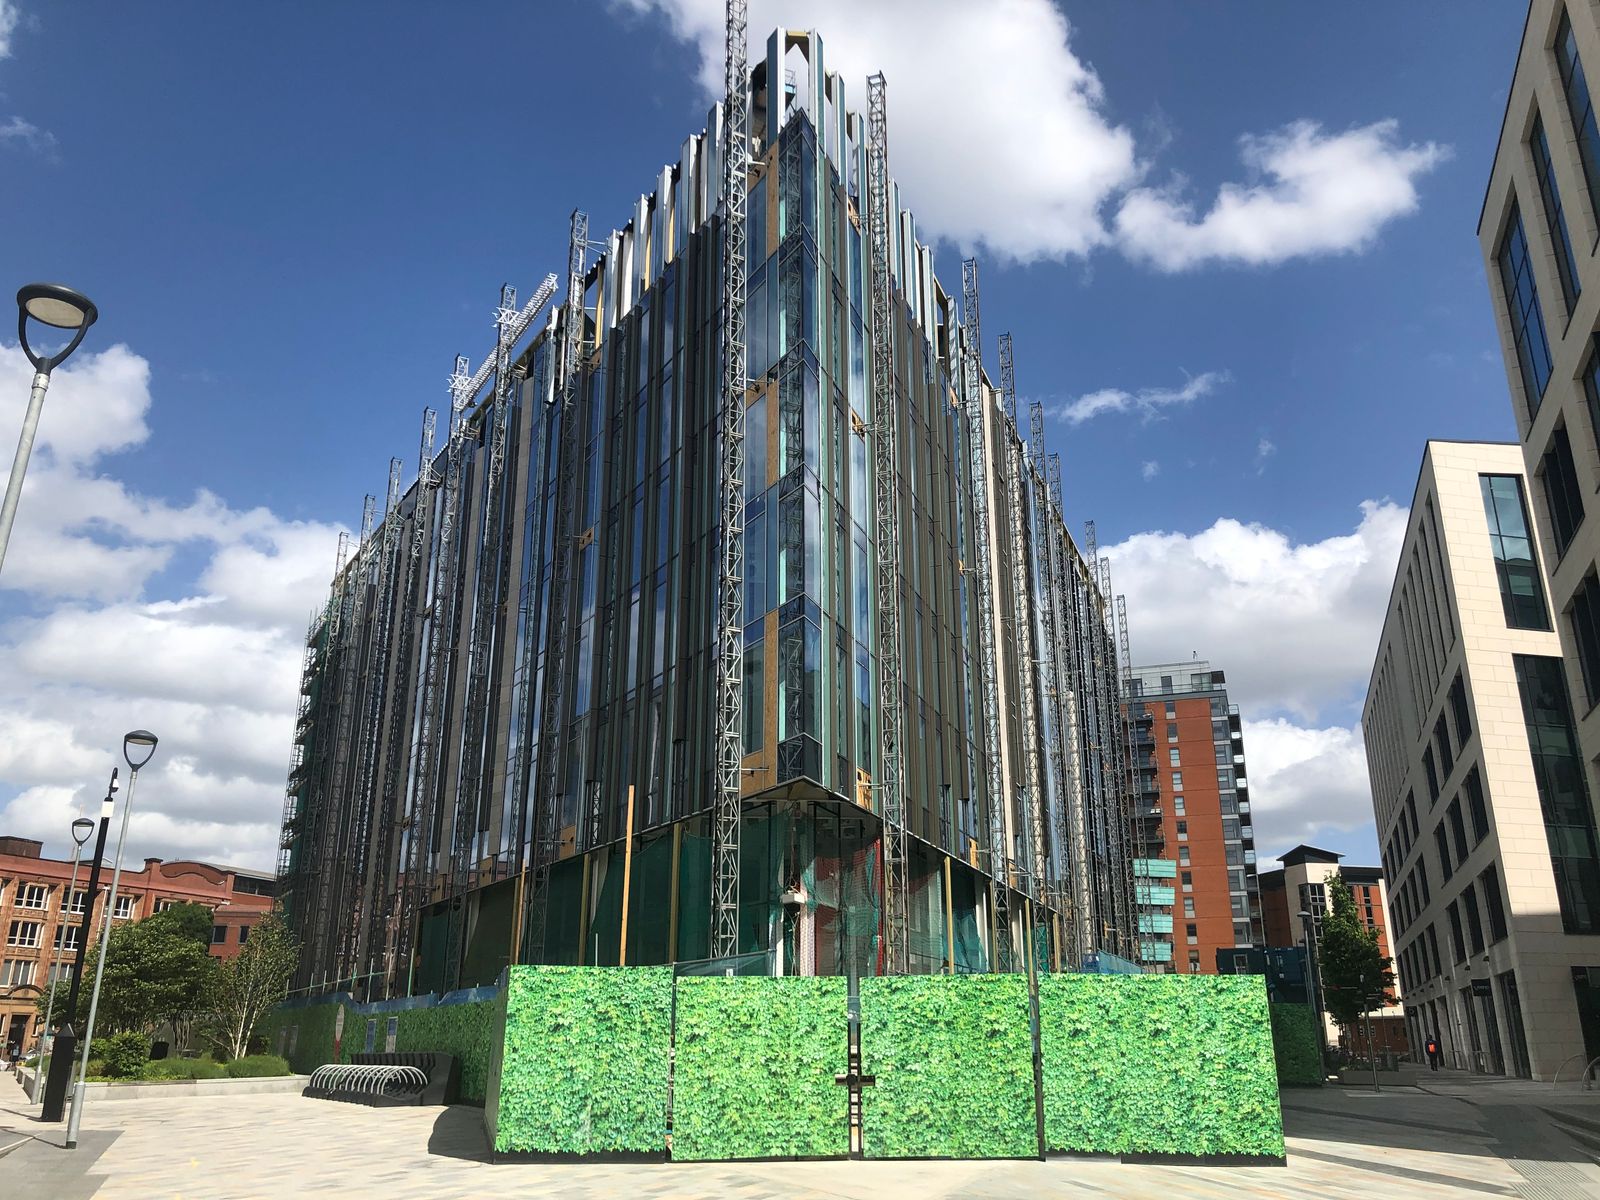 Leeds cast plasterer wins contract to work on new city centre office block